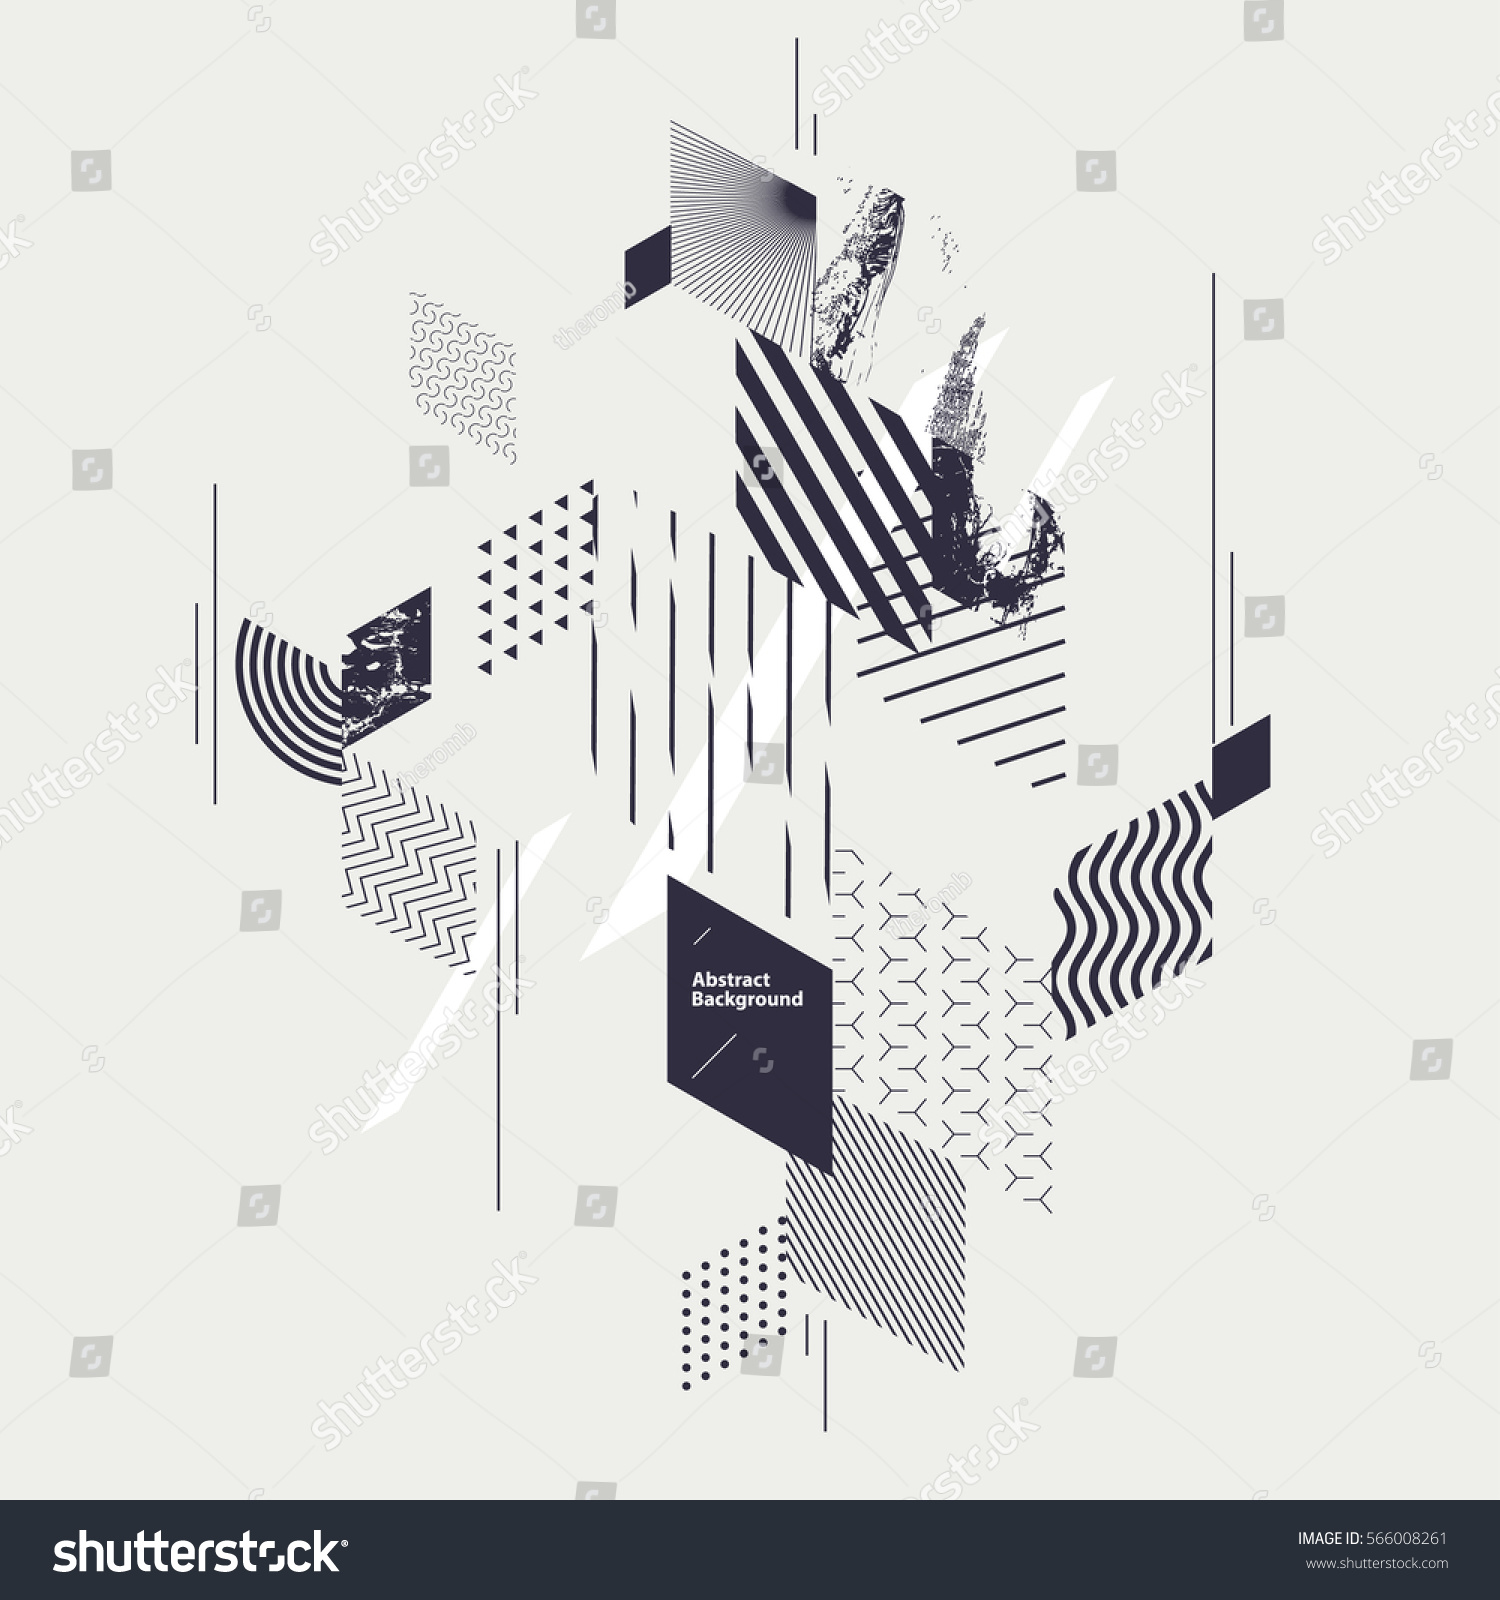 Abstract Geometric Background Decorative Rectangles Stock Vector ...